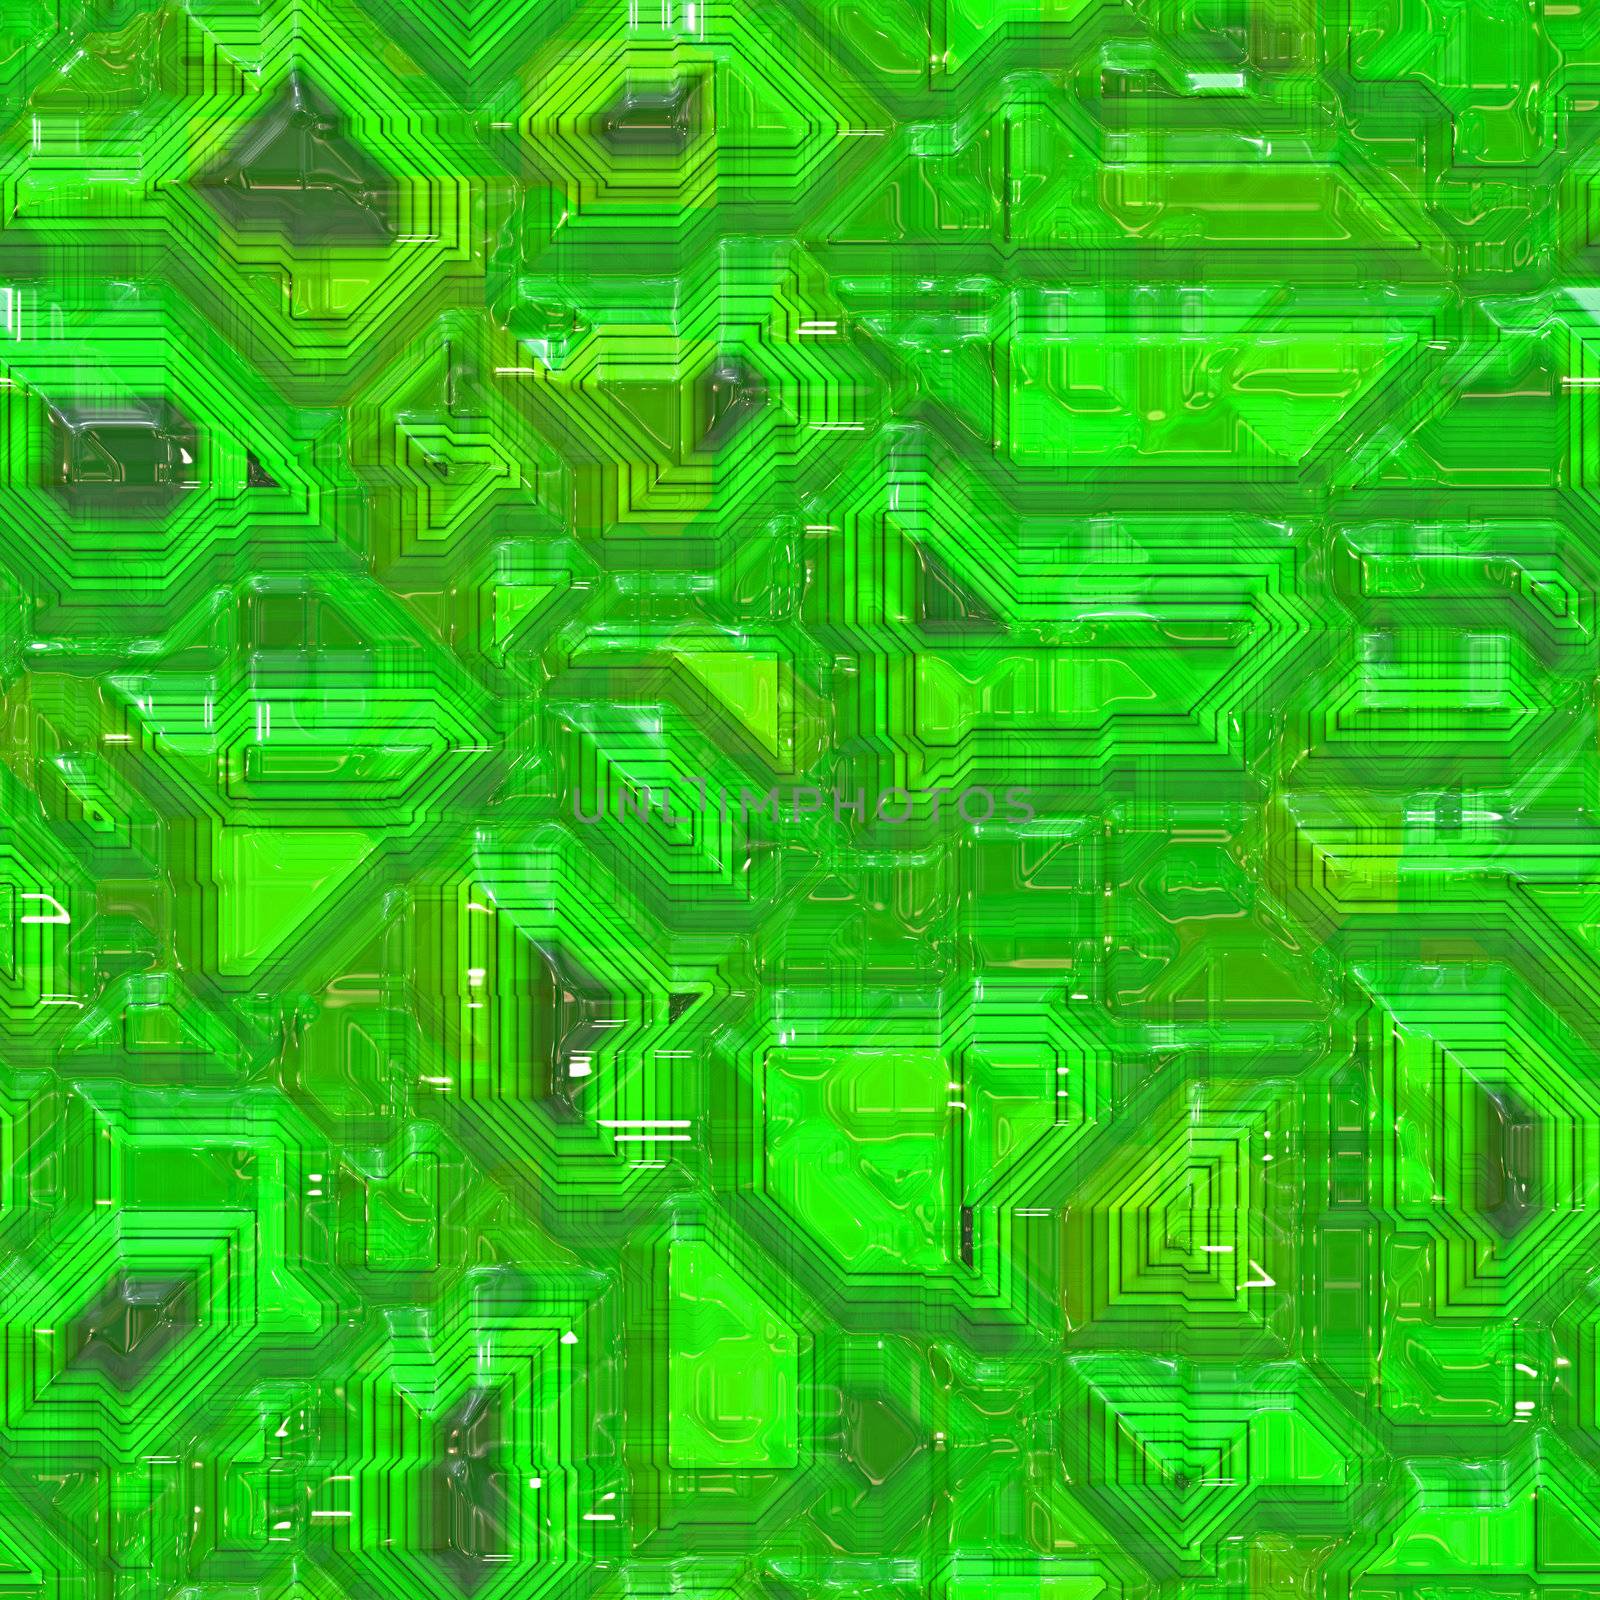 Computer Circuit Board Pattern by graficallyminded